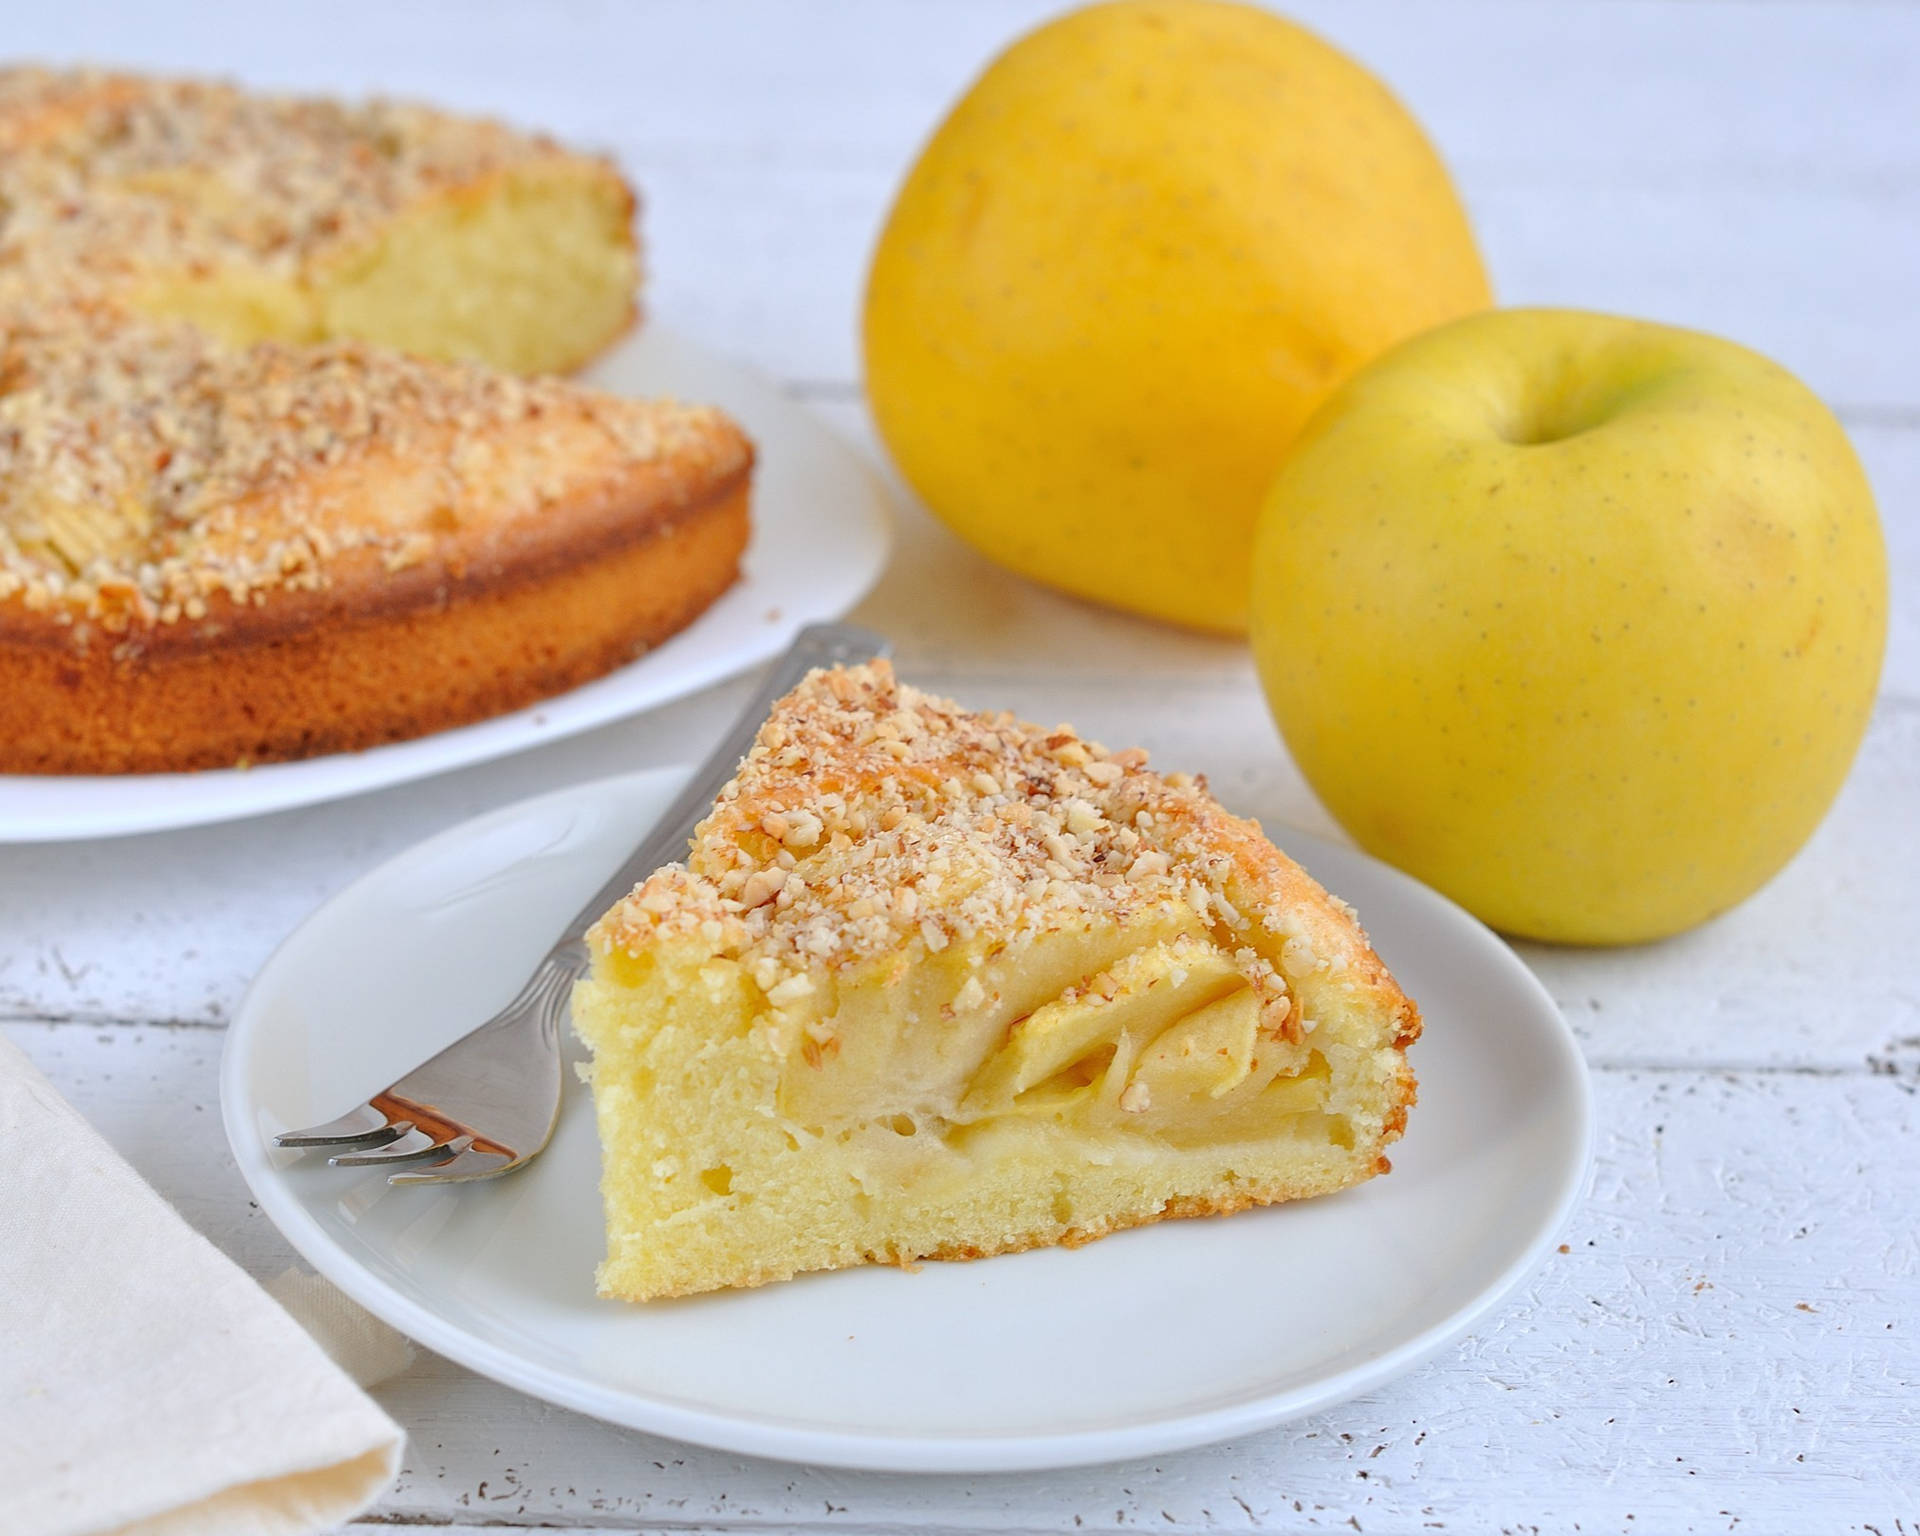 Delicious Pie With Yellow Apples